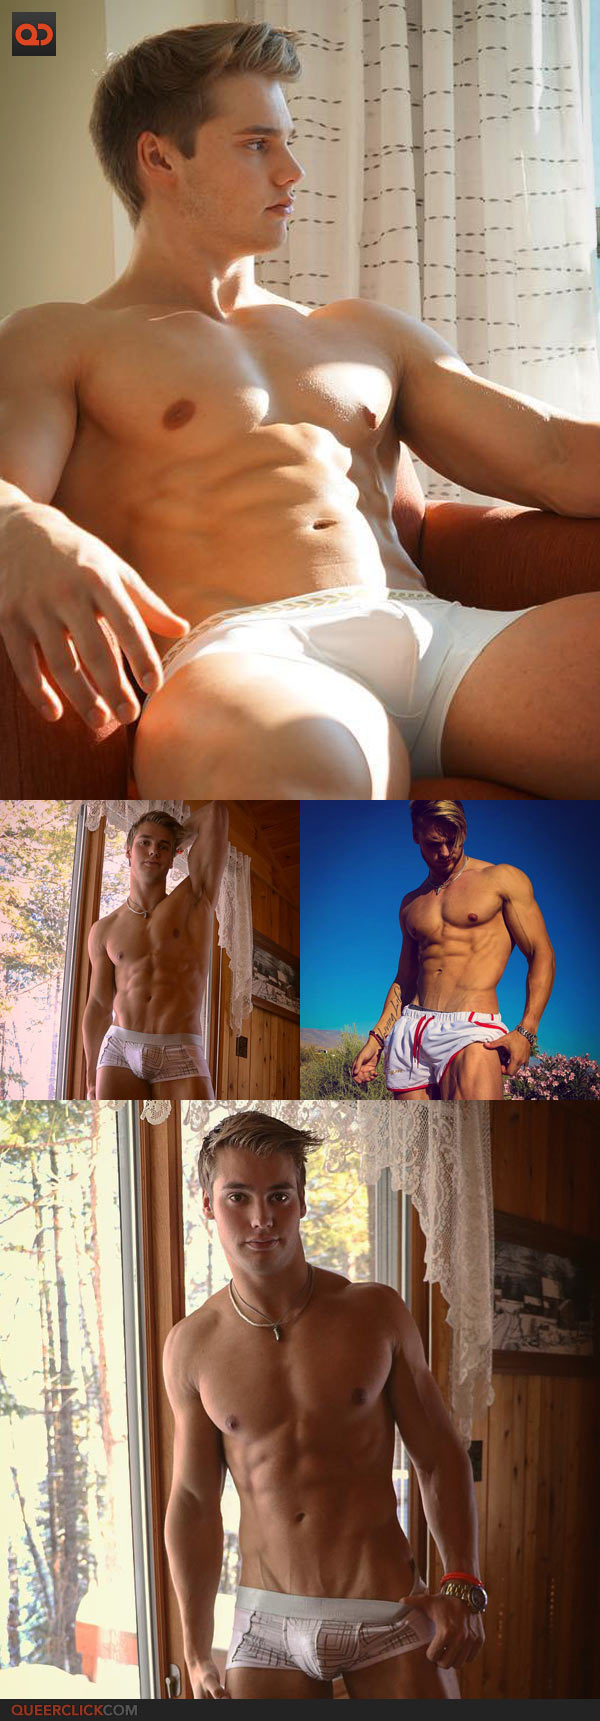 Ten “Bulge”tastic Fitness Models From Instagram That You Need In Your Life This Week!